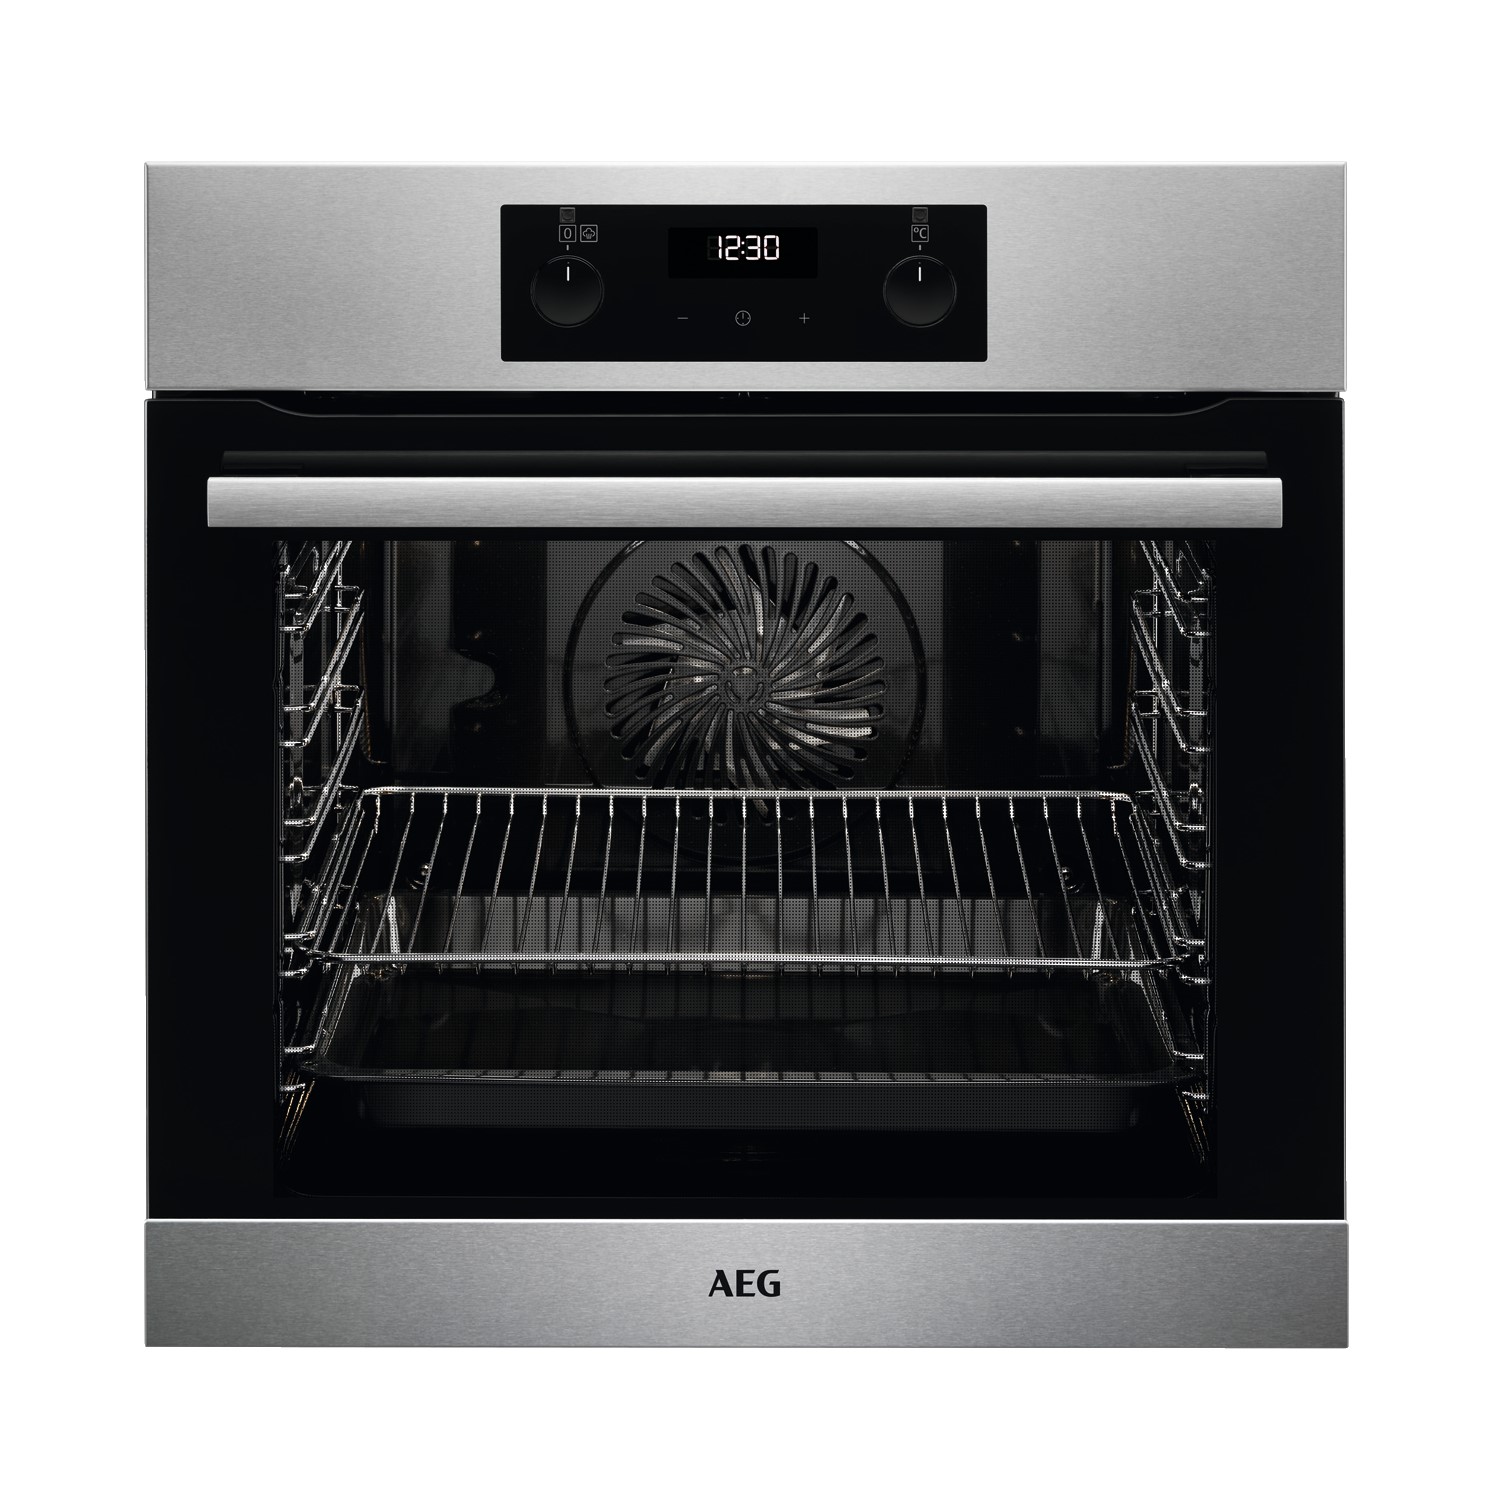 Refurbished AEG BES255011M 60cm Single Built In Electric Oven